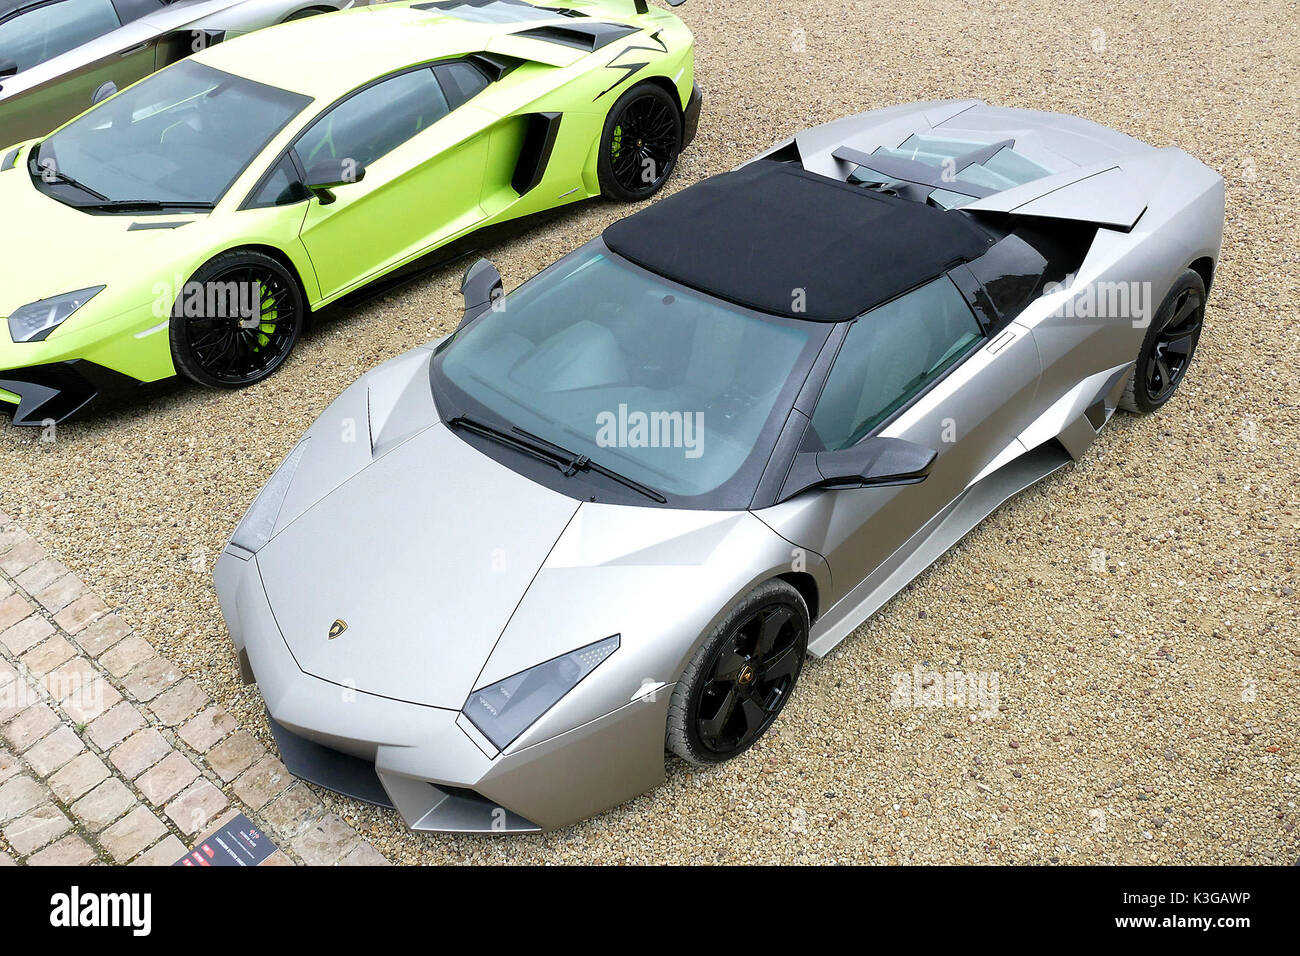 Blenheim Palace, Woodstock, Oxfordshire, UK. 03rd Sep, 2017. A 2010 Lamborghini Reventon Roadster - one of hiundreds of supercars on show at Blenheim Palace in Oxfordshire Picture: Ric Mellis 3/9/2017 Blenheim Palace, Woodstock, Oxfordshire Credit: Ric Mellis/Alamy Live News Stock Photo